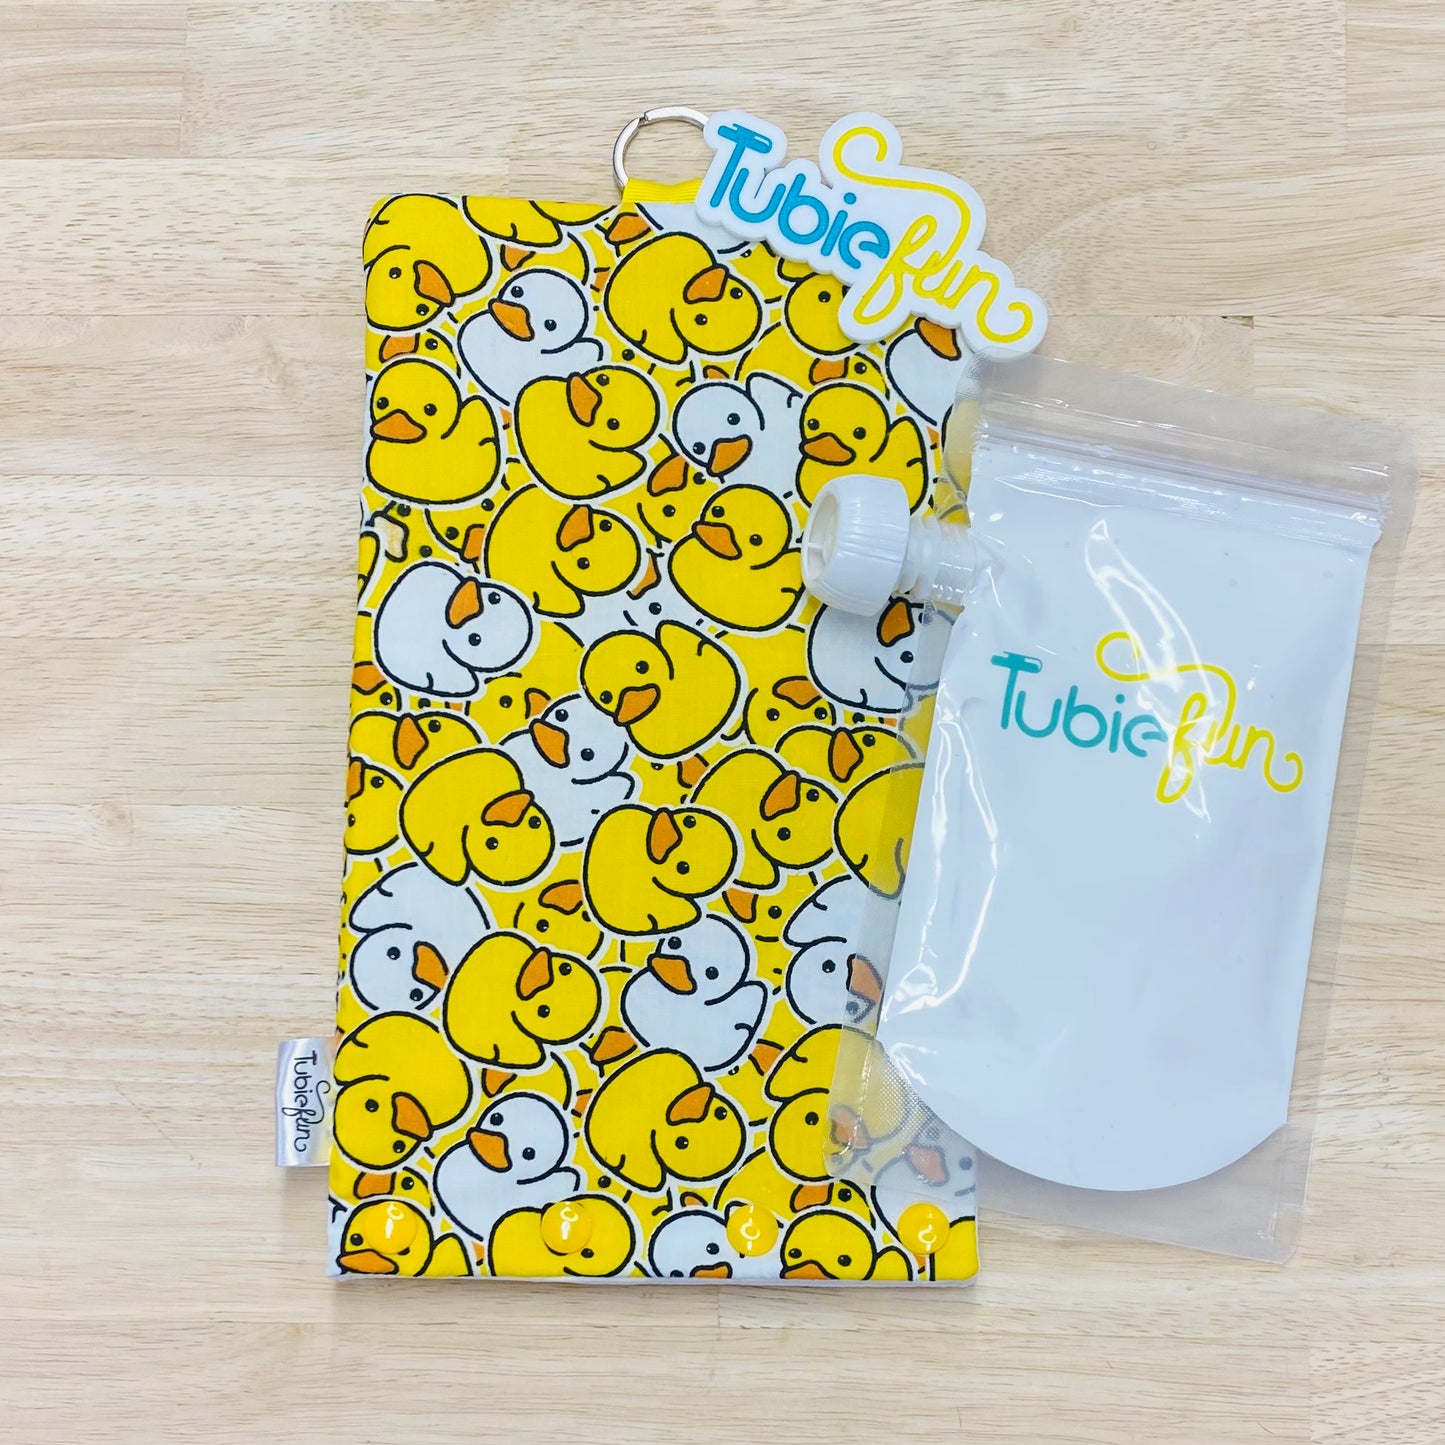 NEW Insulated Milk Bag Suitable for Tubie Fun 500ml Reusable Pouches - Ducks